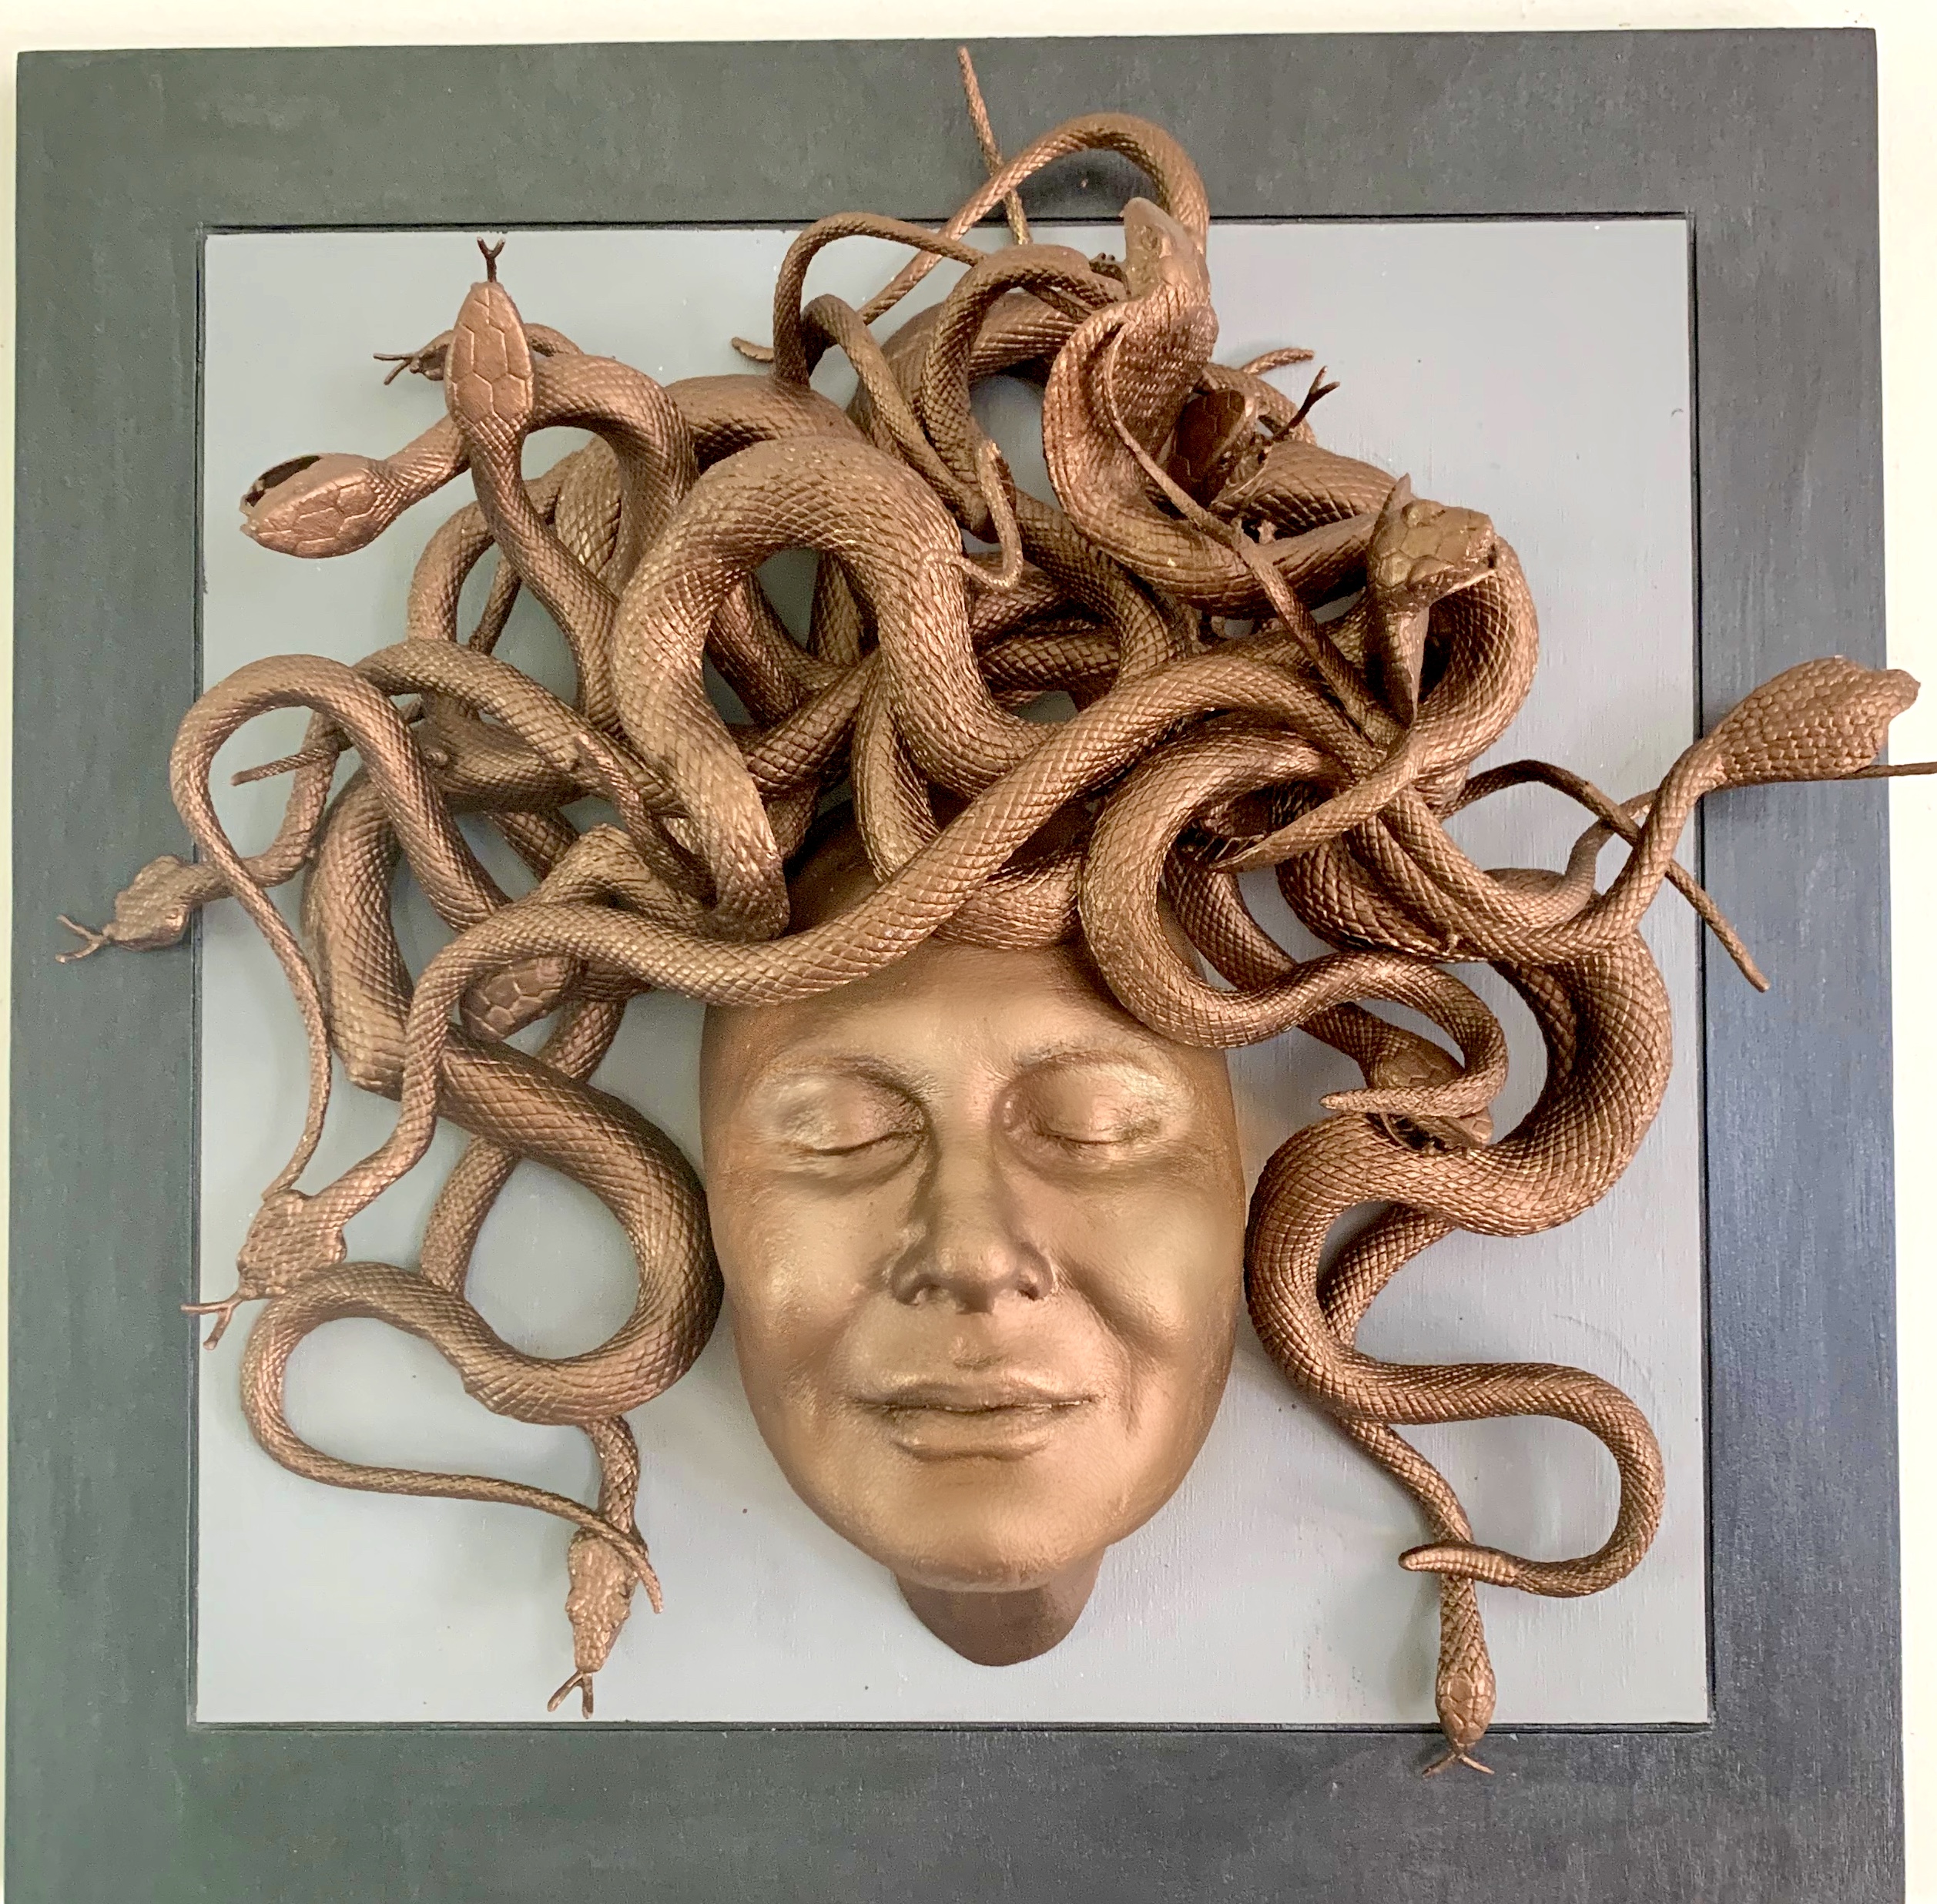 Sculpture of face with snakes for hair